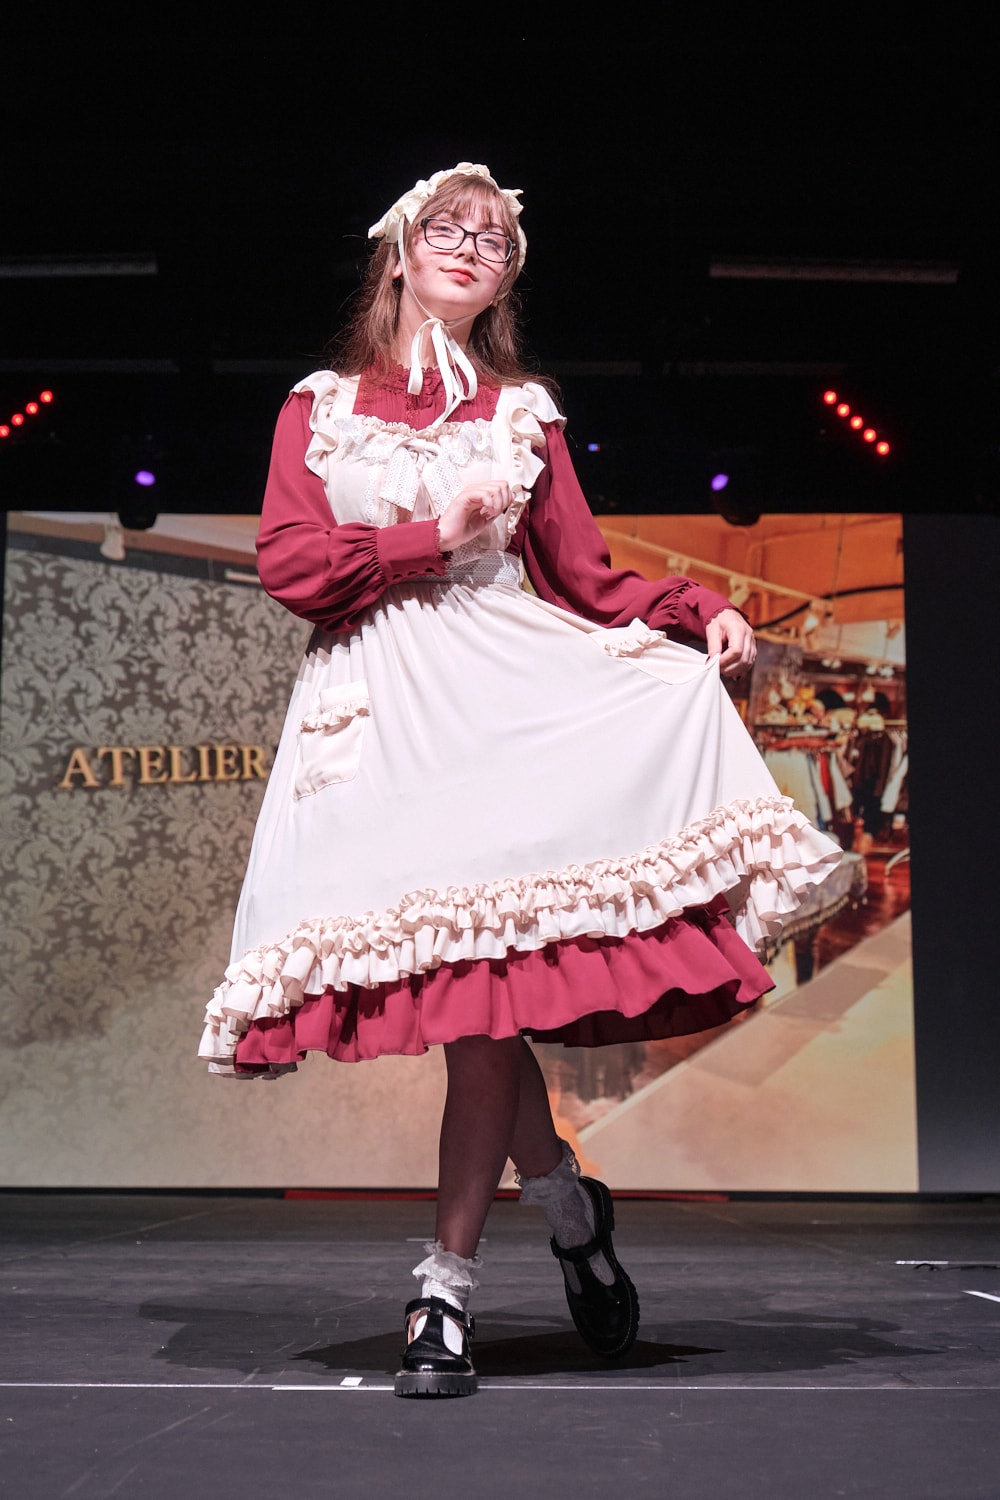 Atelier Pierrot classic lolita model wearing wine red long sleeve one piece dress with ivory apron on top - full body standing pose 2.